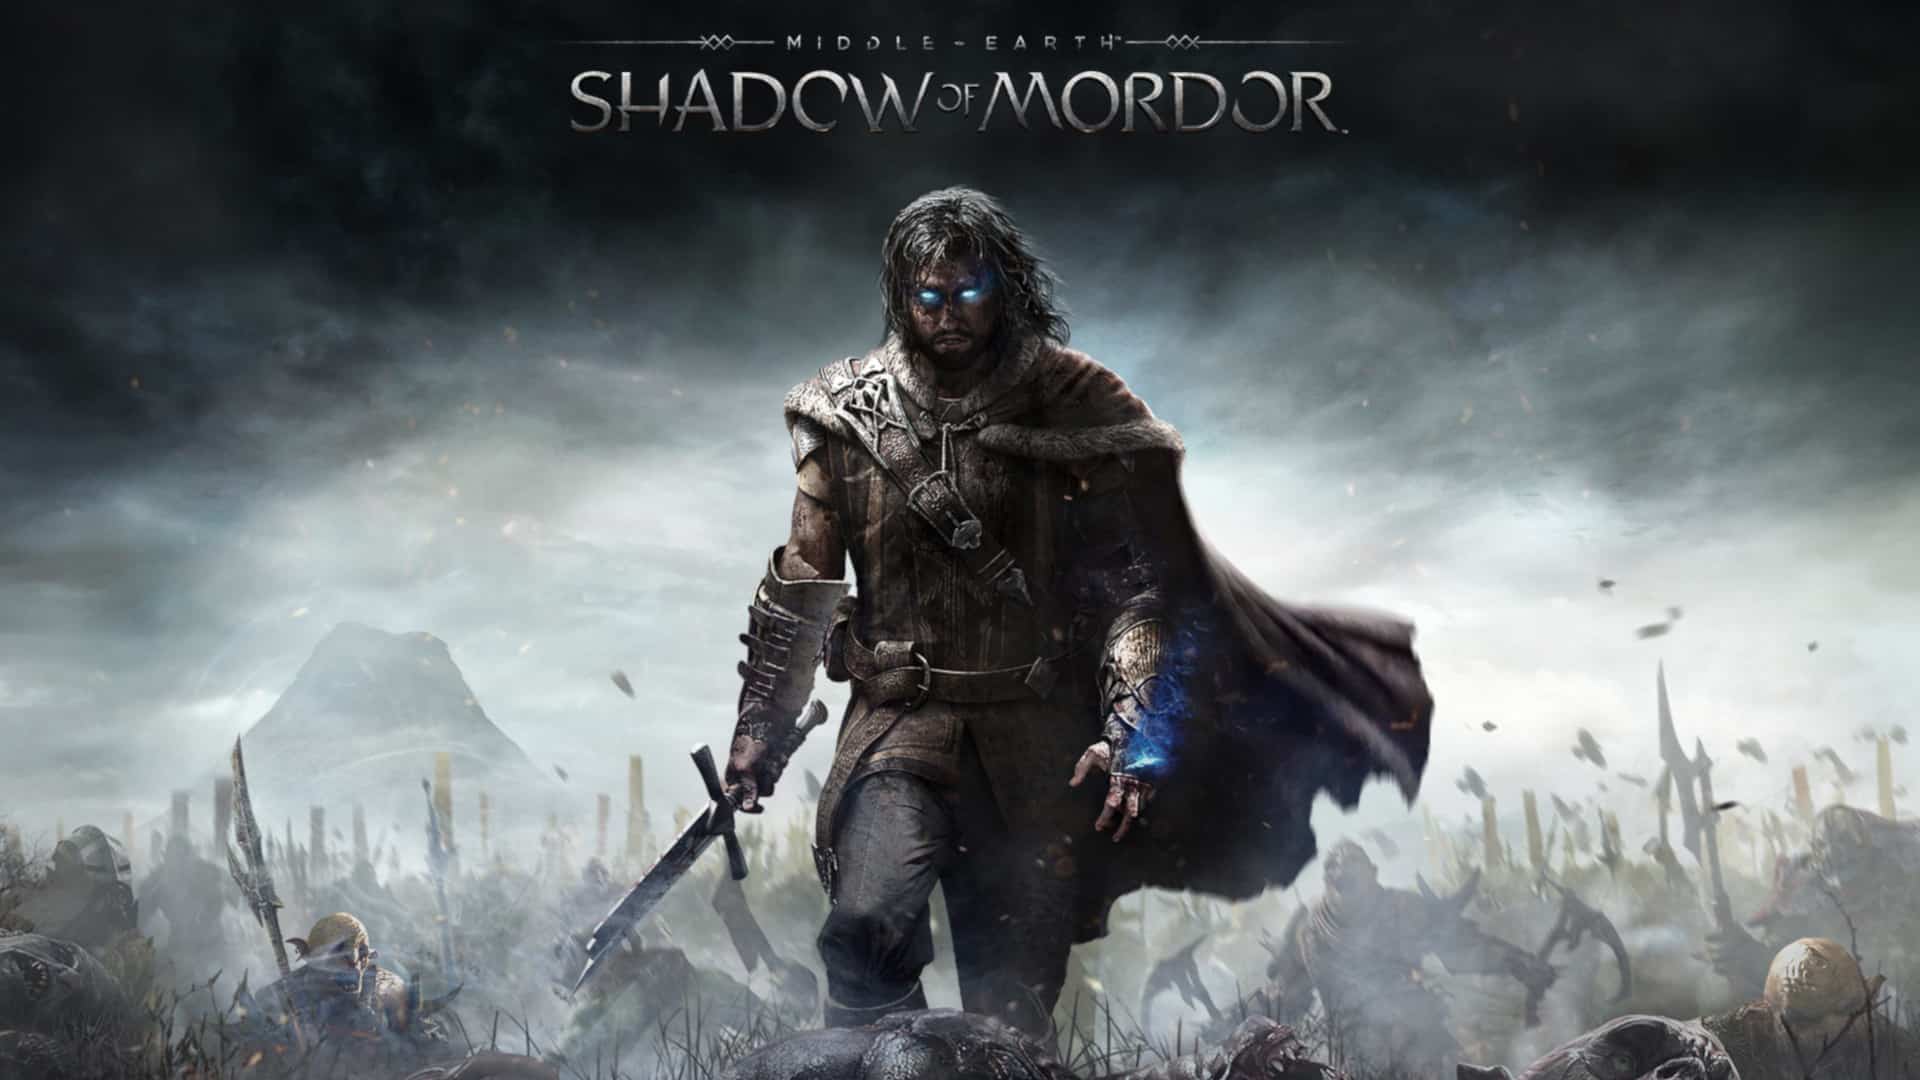 Is Middle Earth Shadow of War definitive edition the full game?